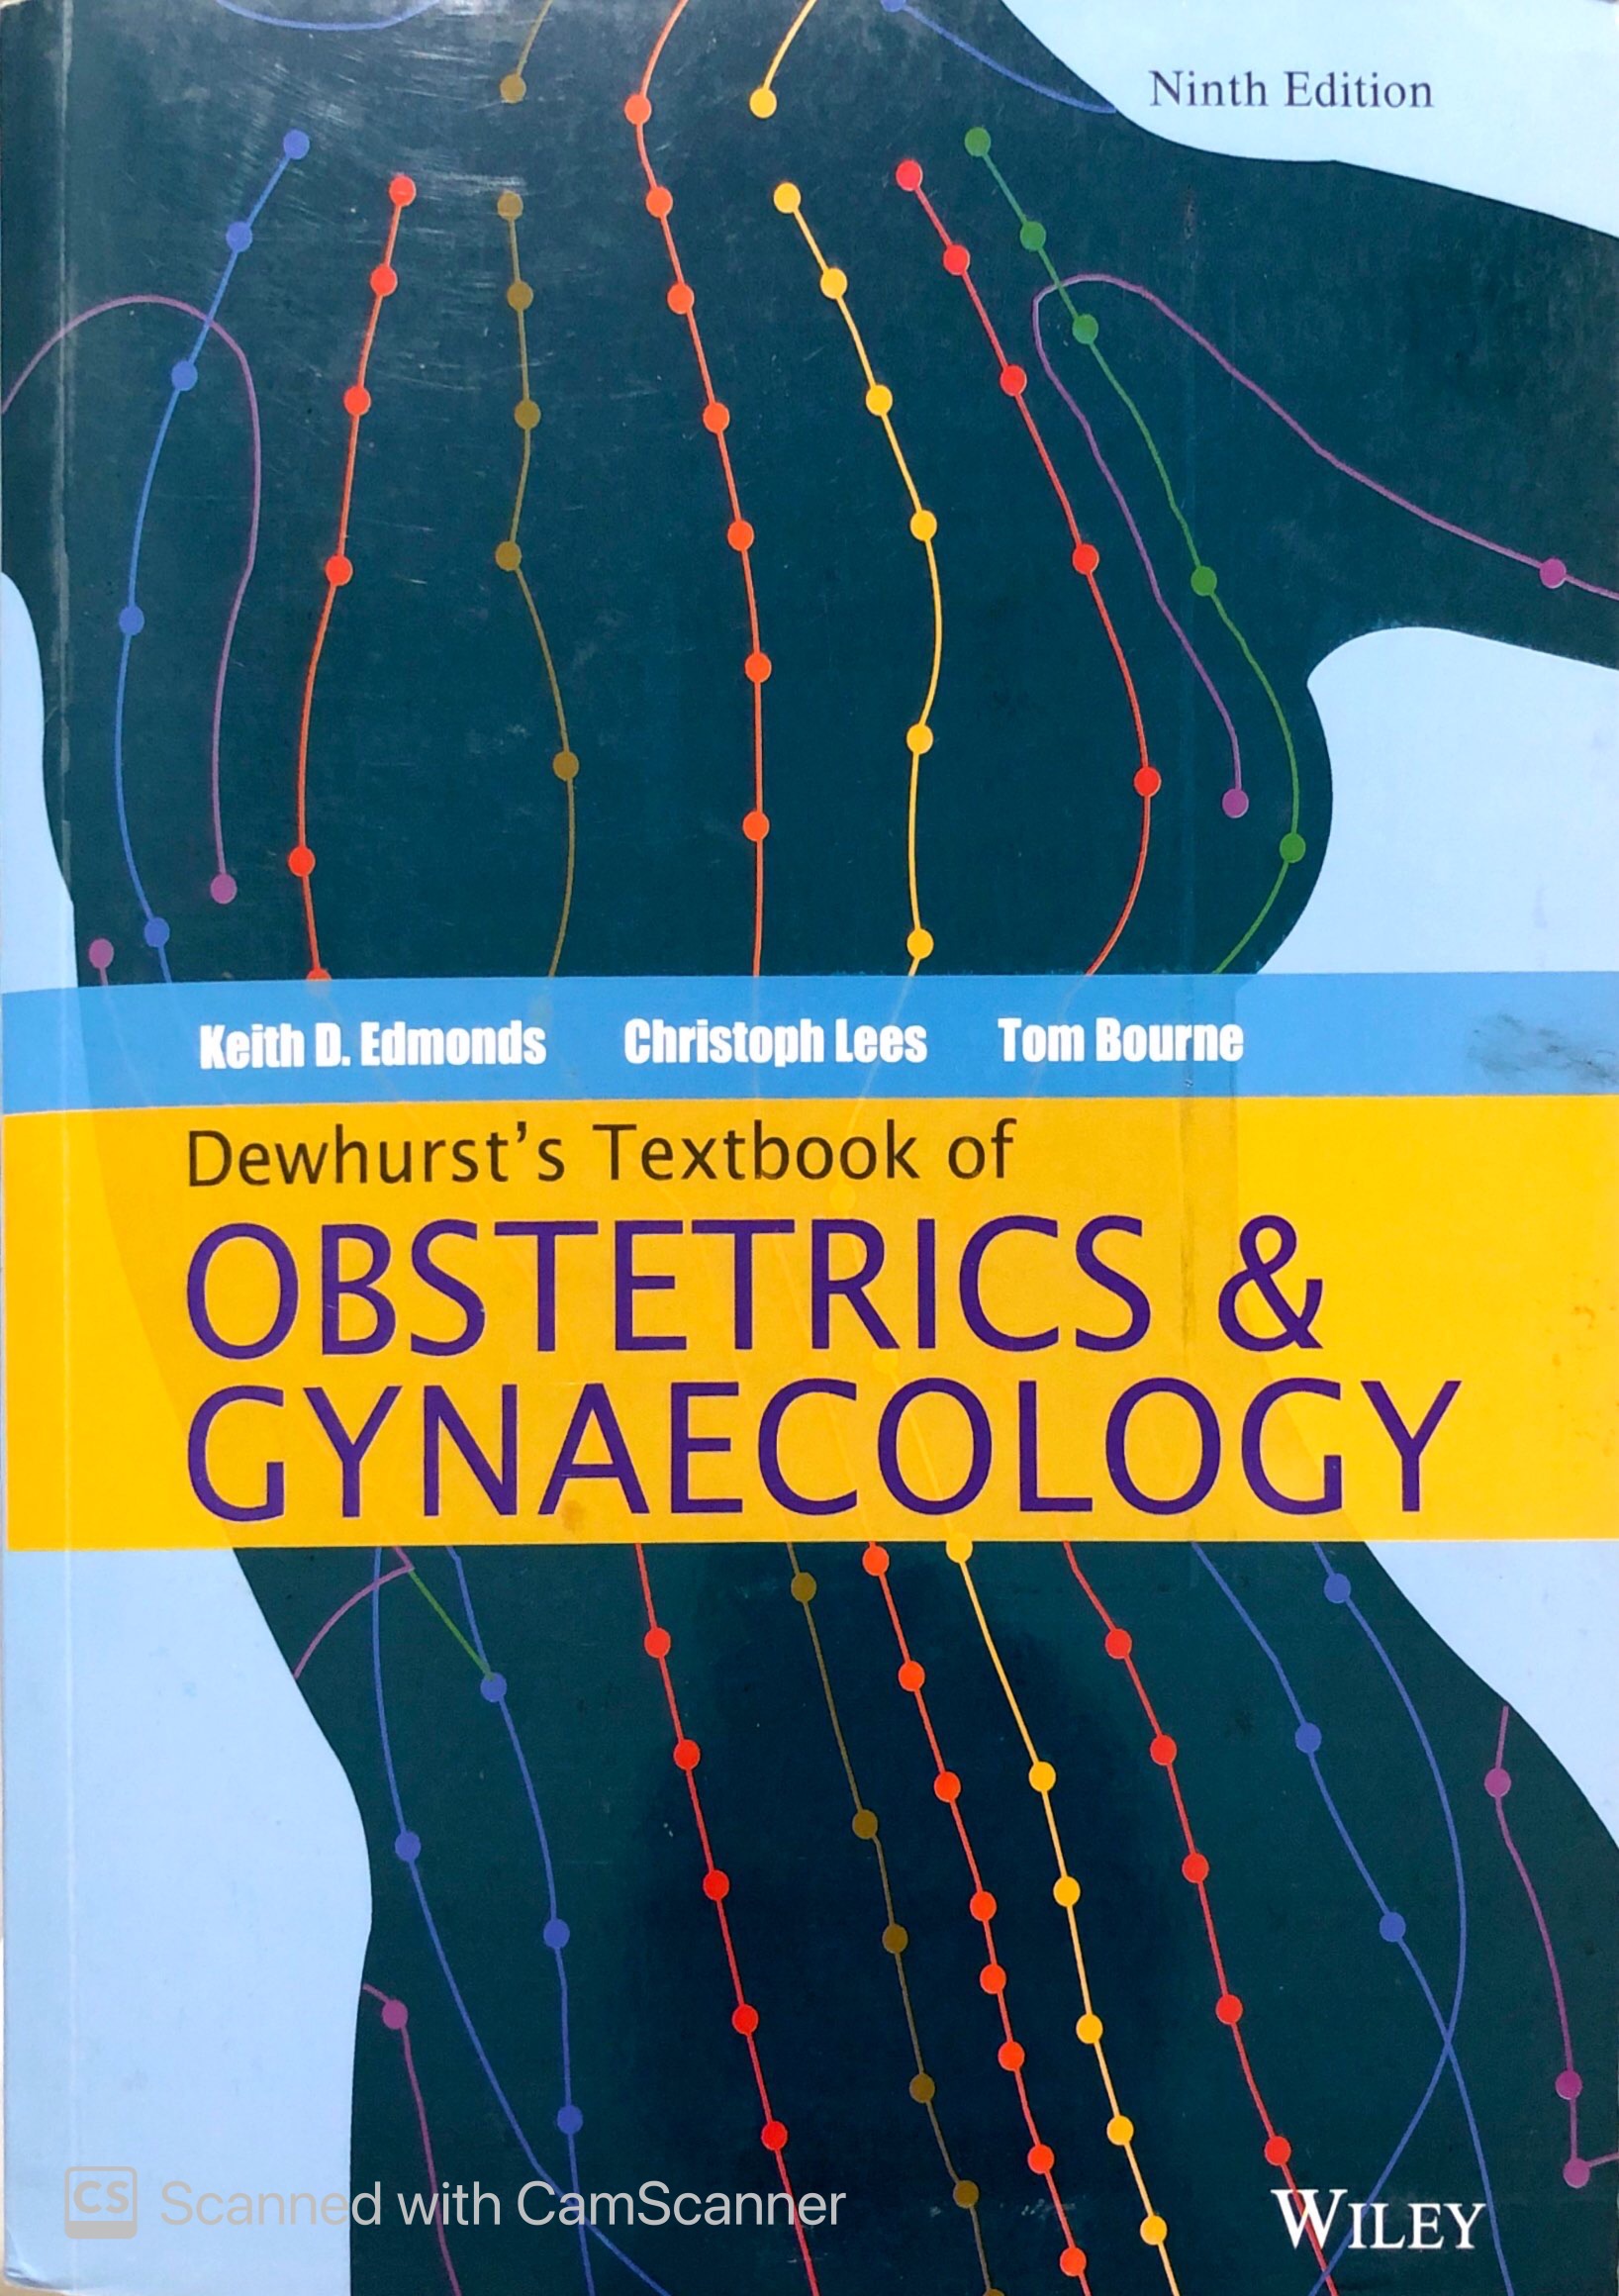 dewhurst’s textbook of obstetrics and gynaecology